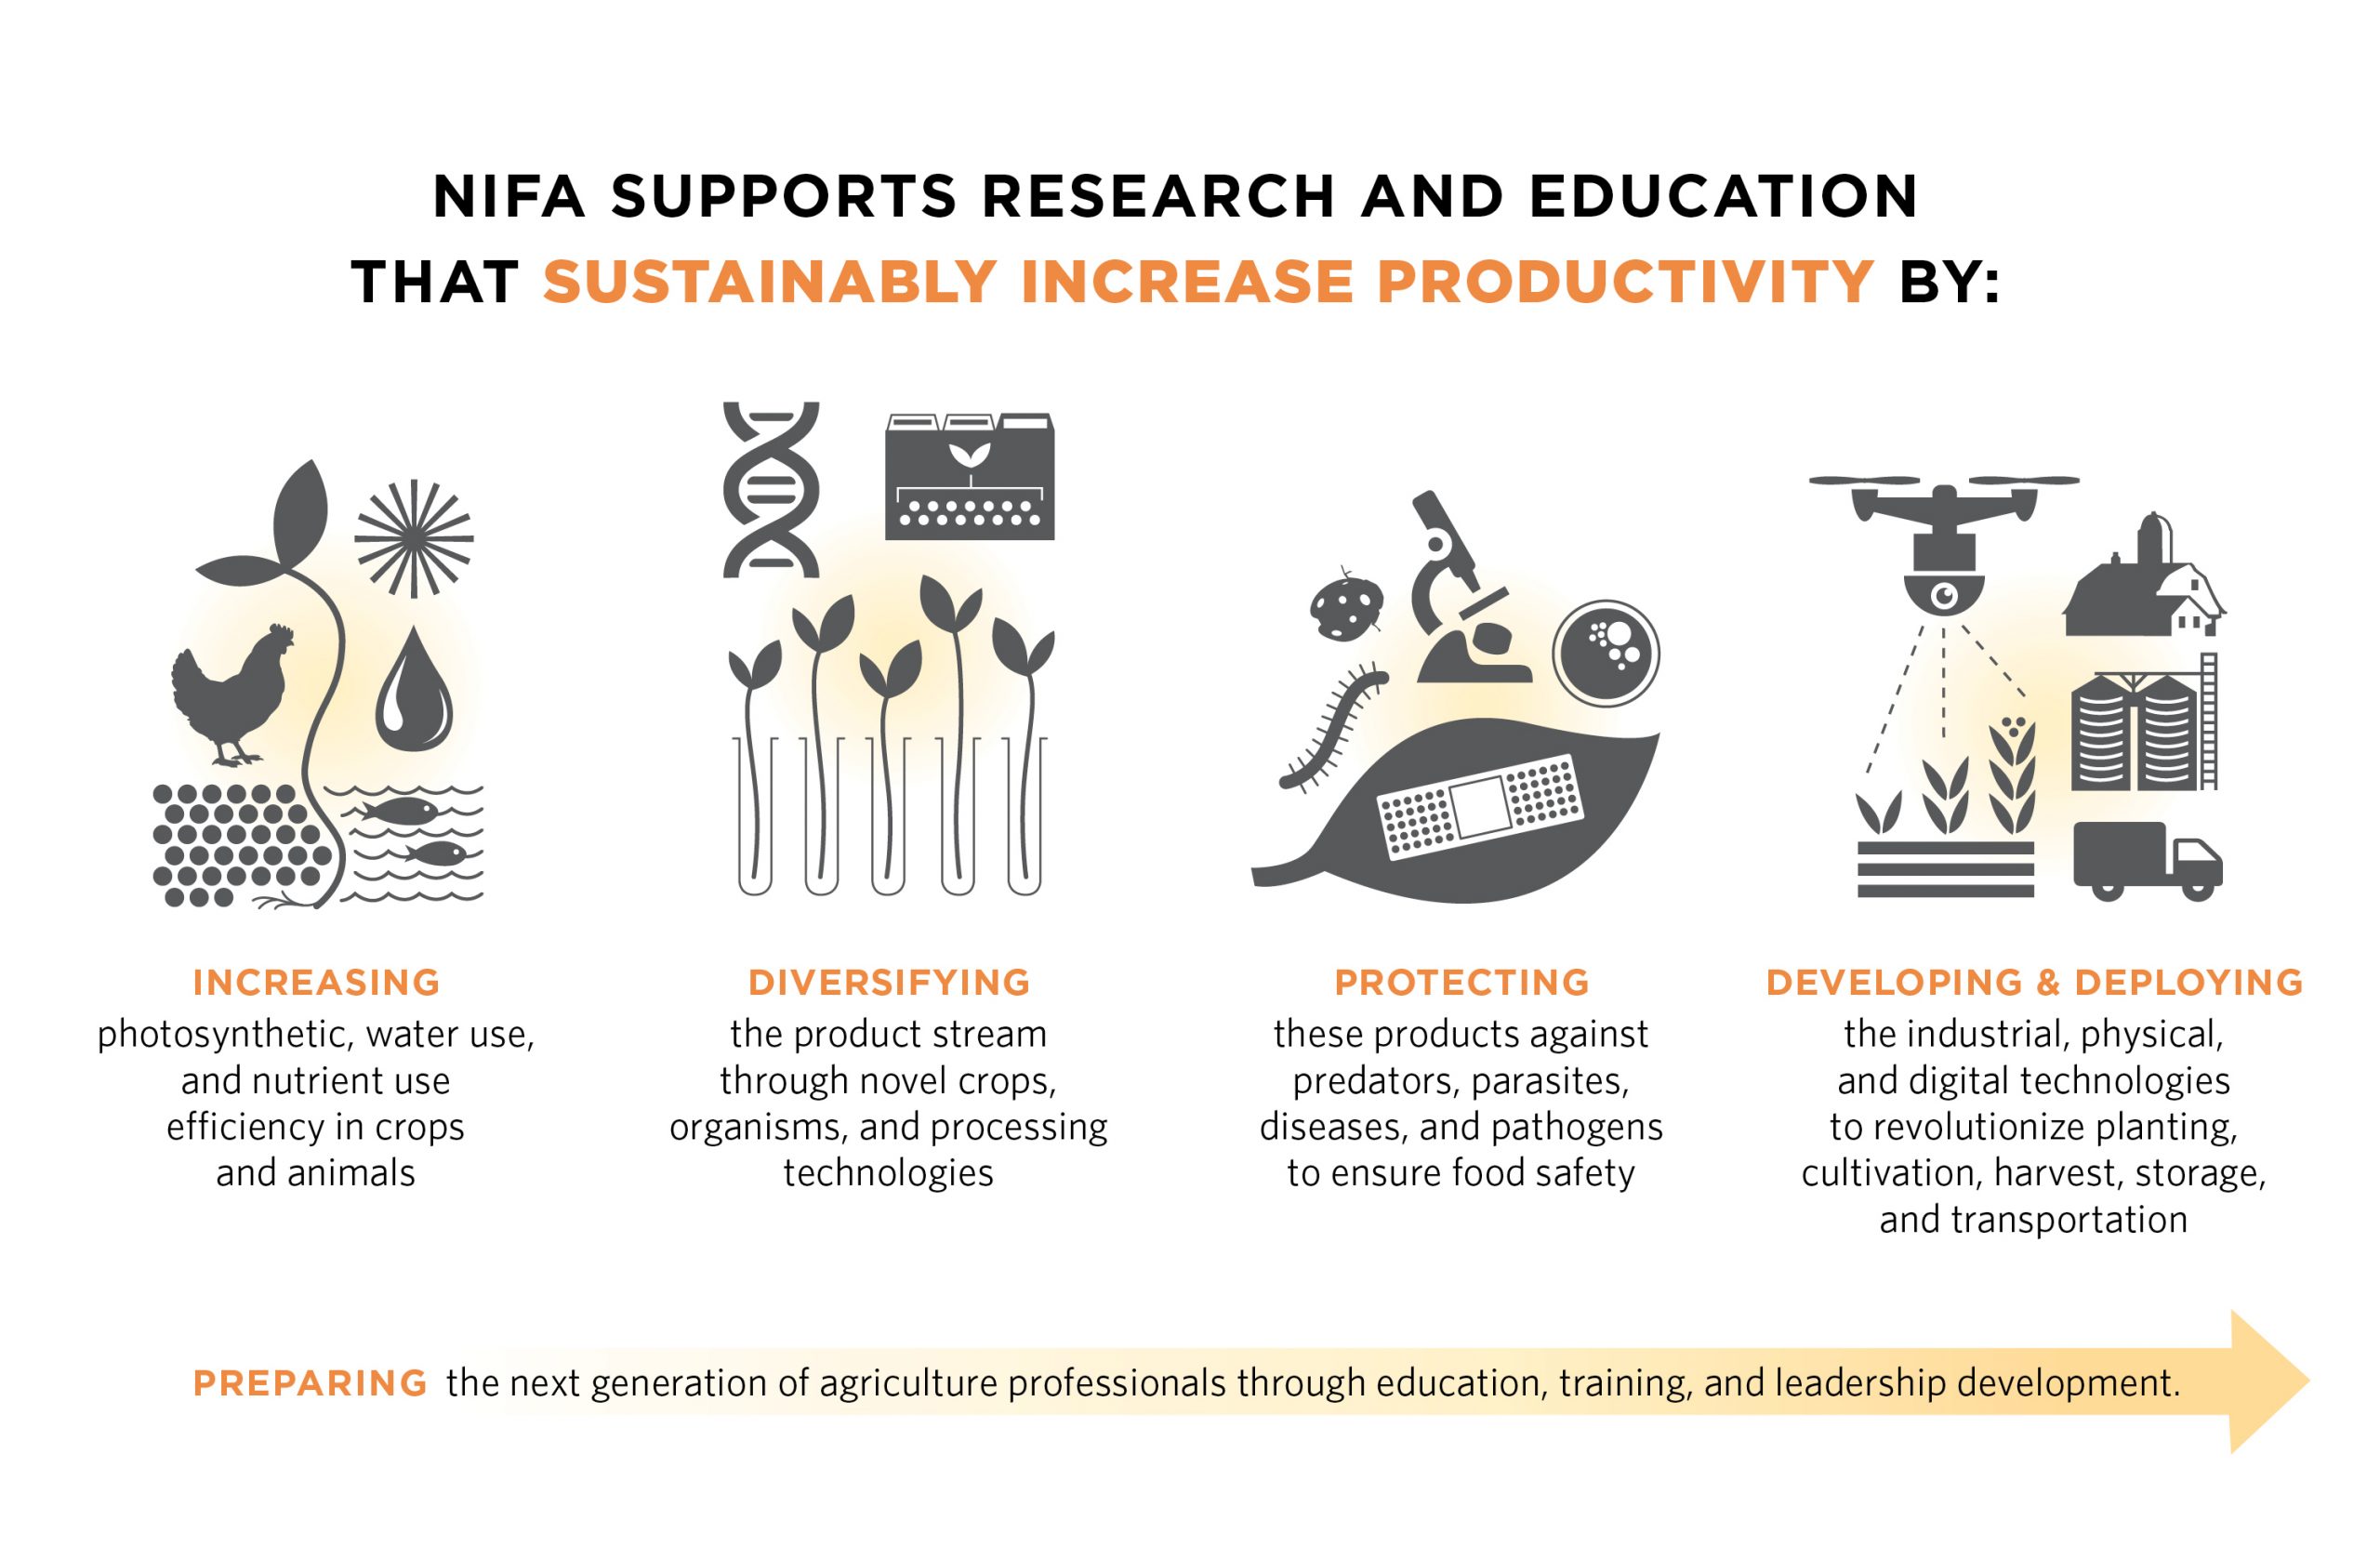 An infographic showing how USDA NIFA supports research and education in agriculture